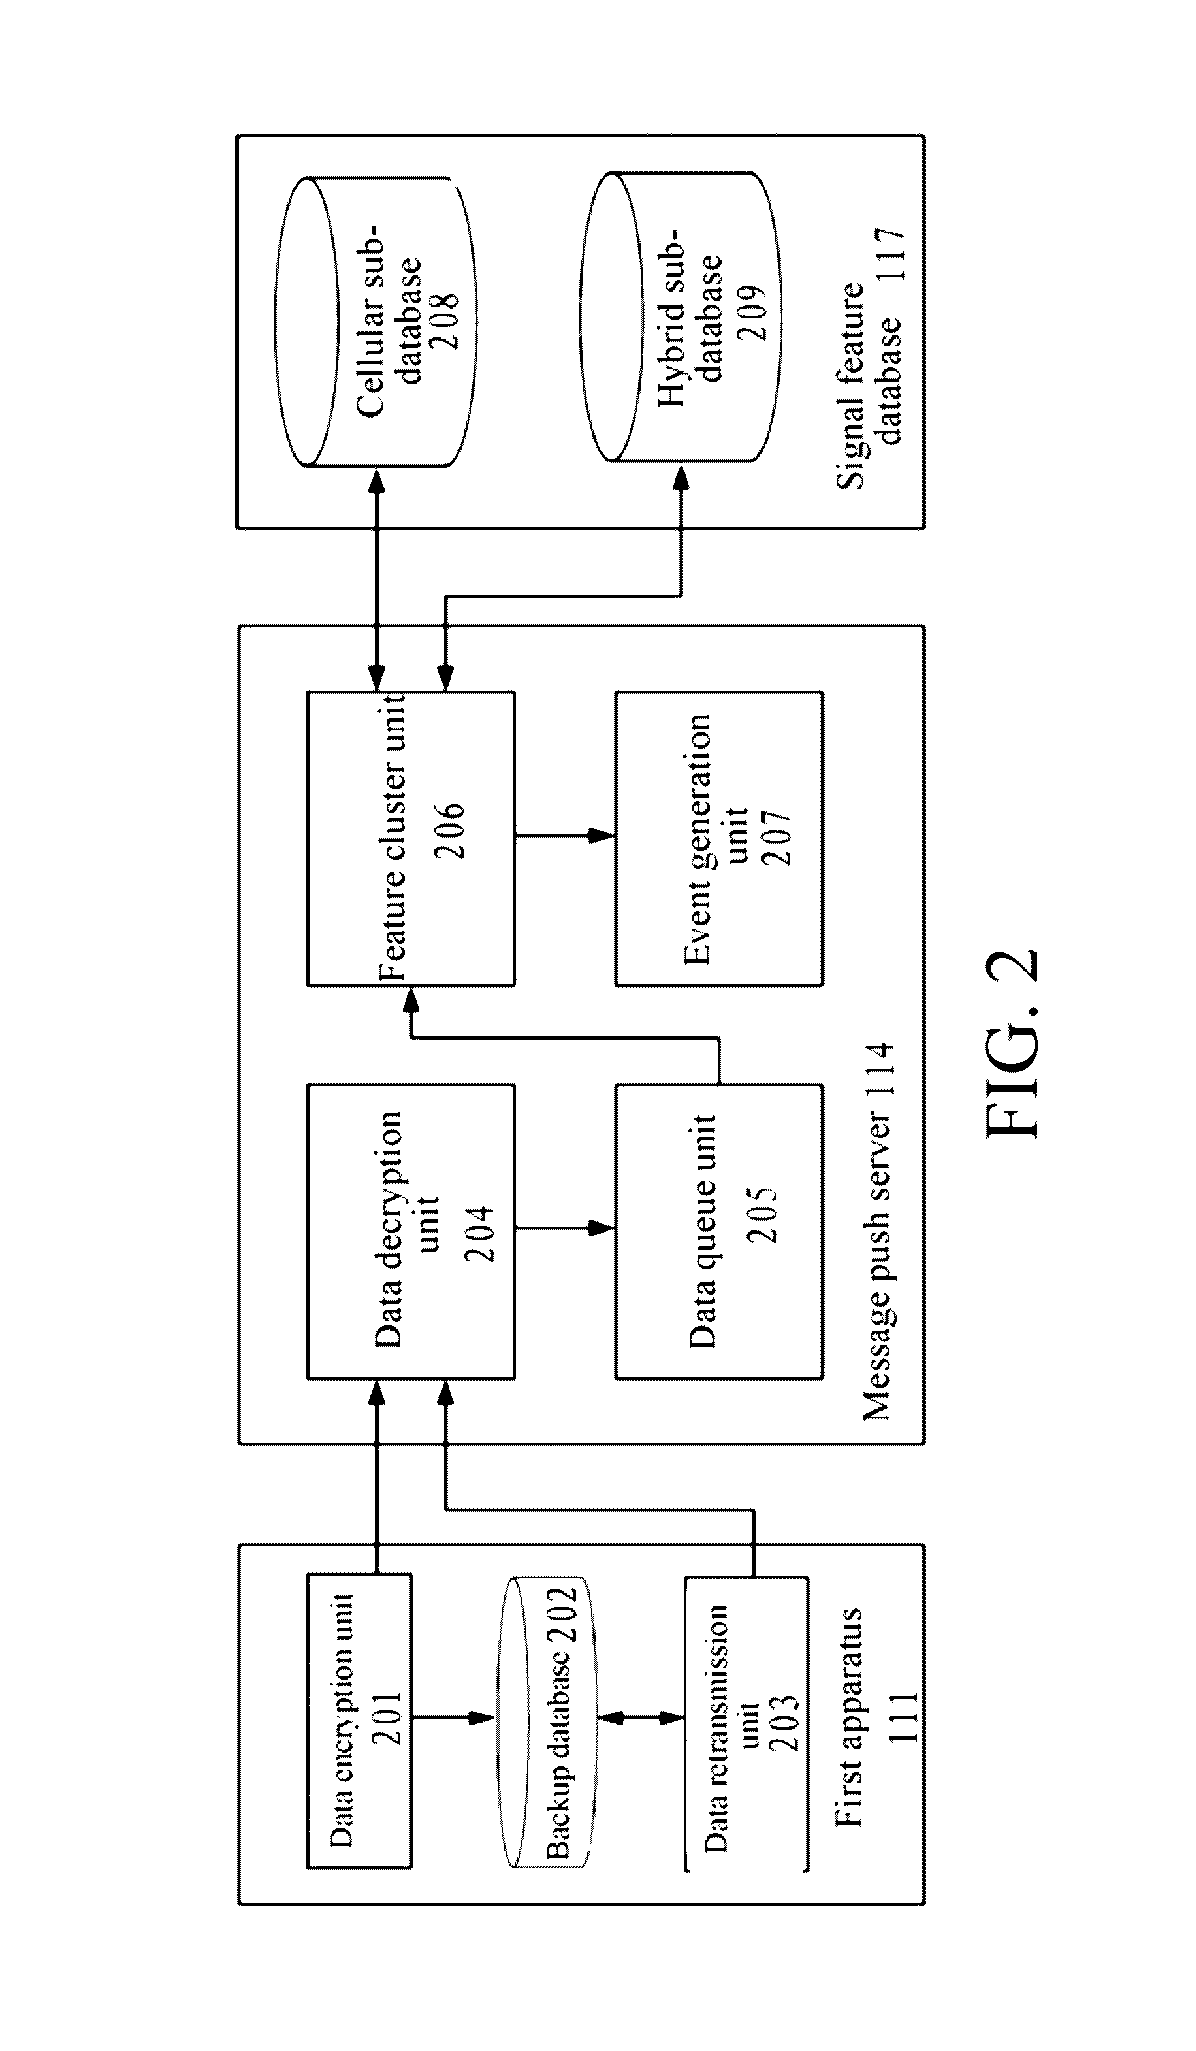 Method for implementing end-to-end message push using a geographical signal feature cluster